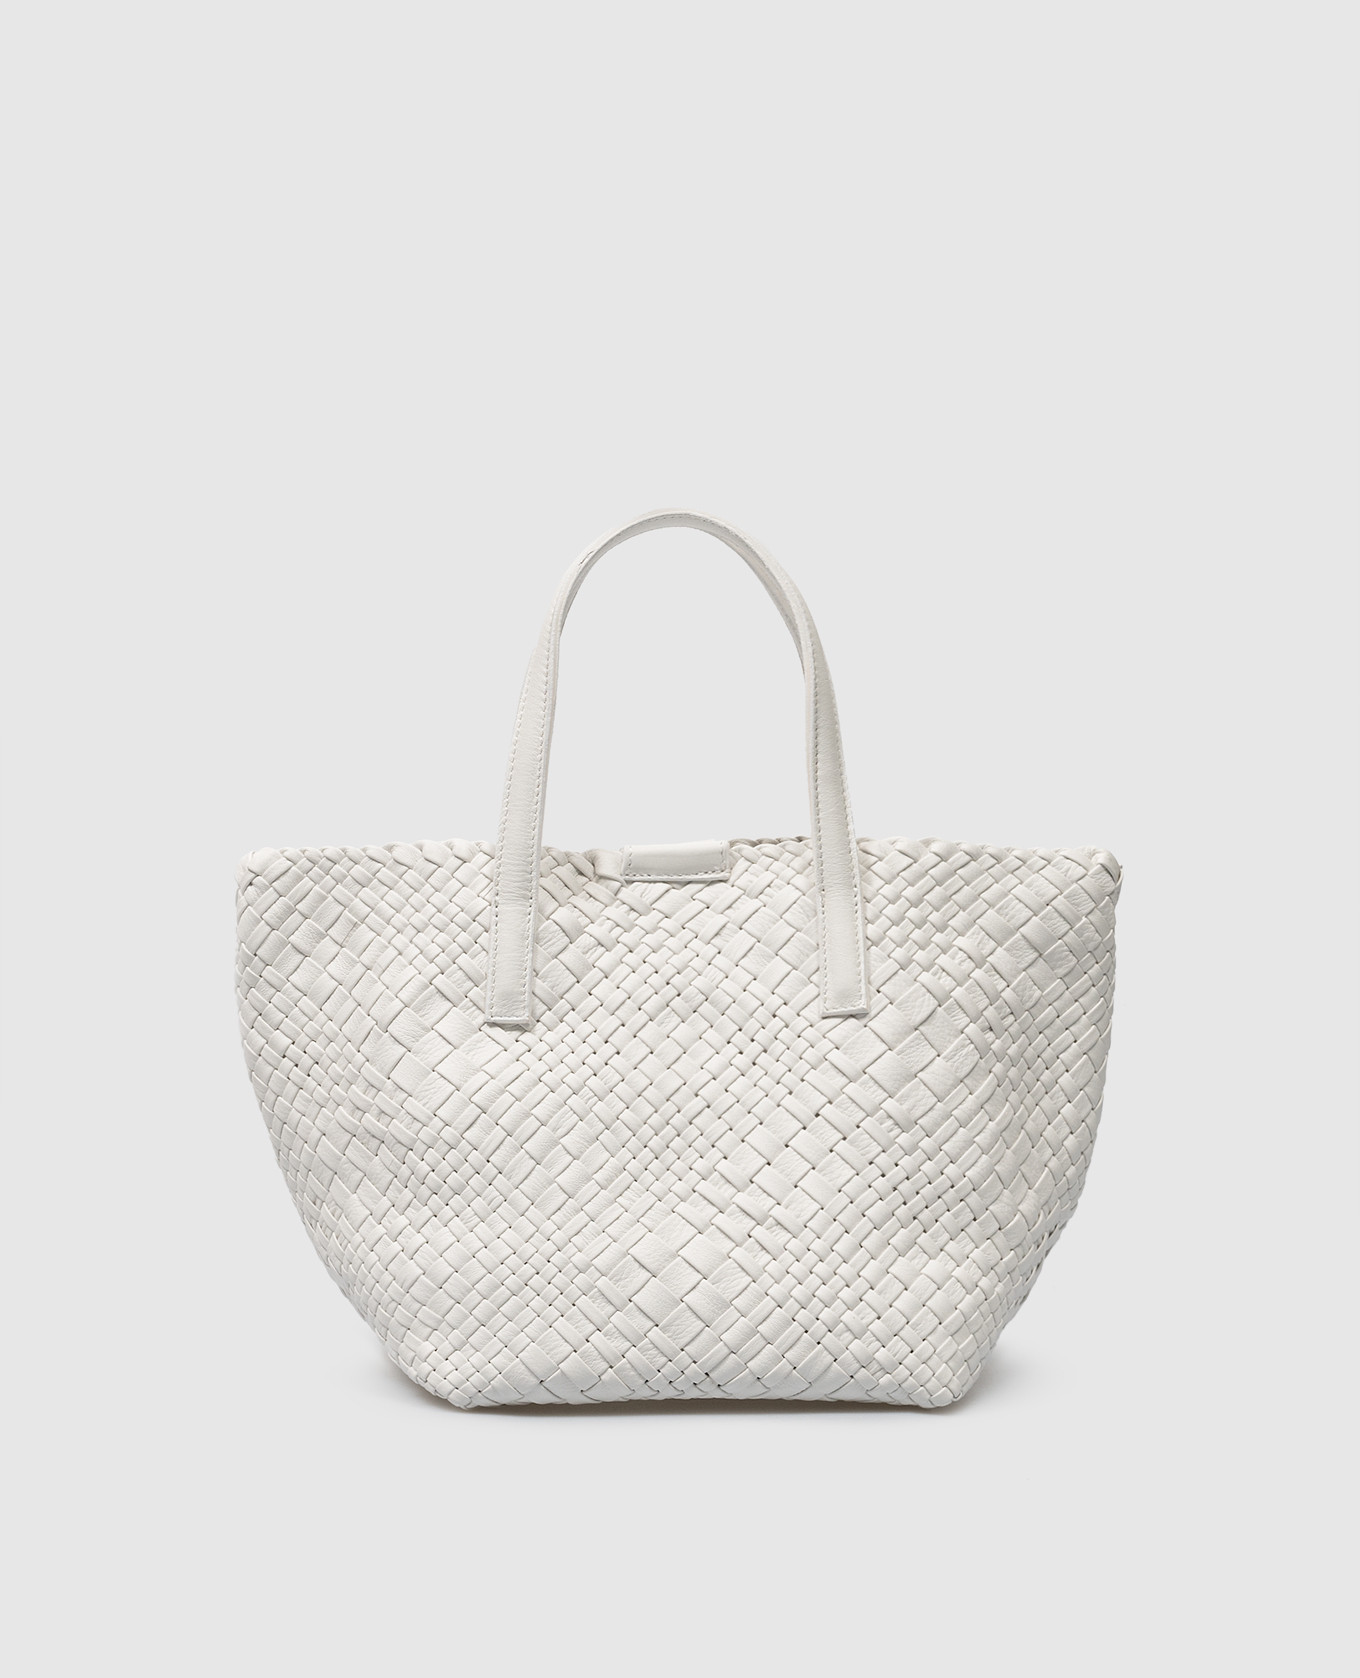 White leather woven tote bag